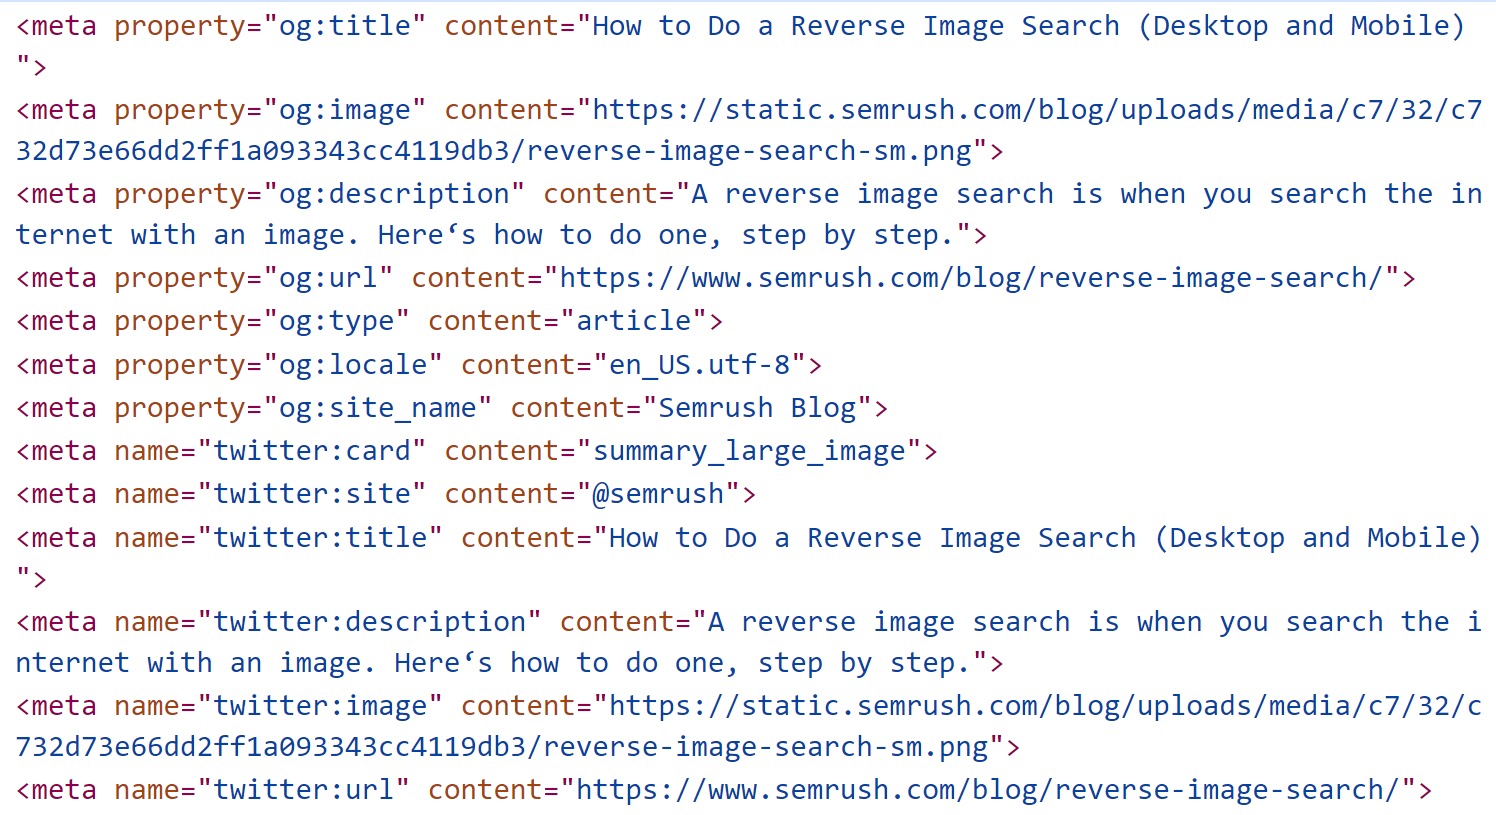 An HTML code of Semrush's post on reverse image search